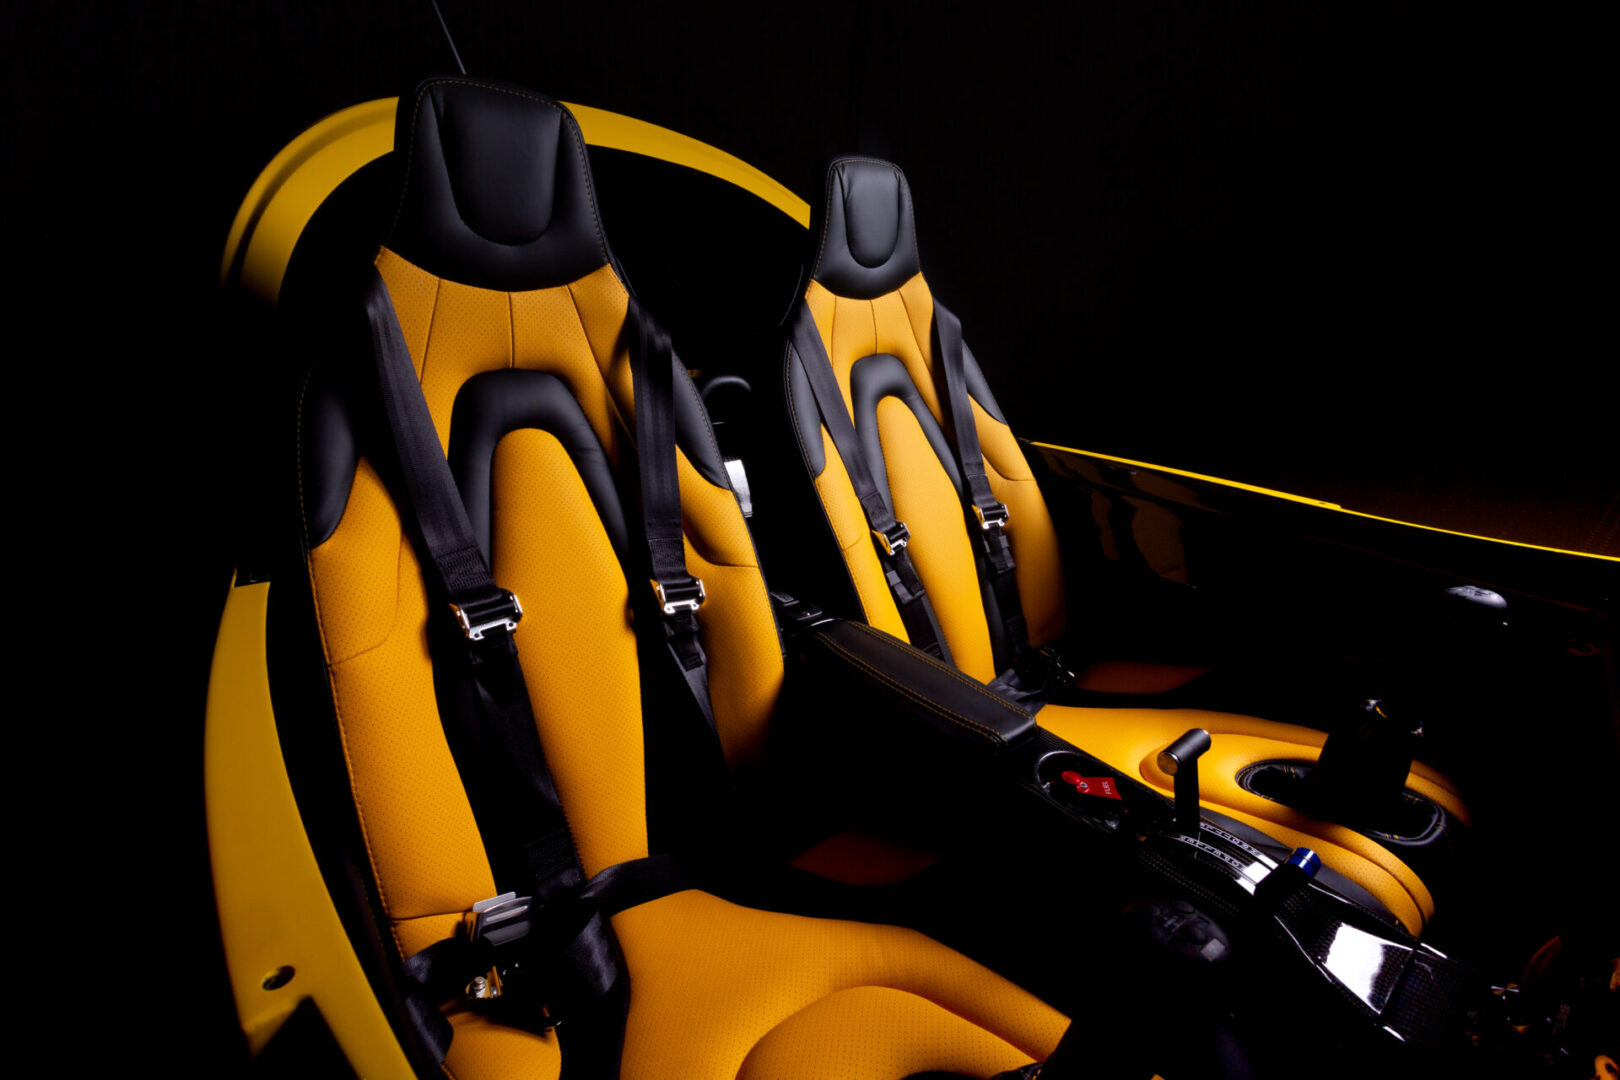 A yellow and black seat in the dark.